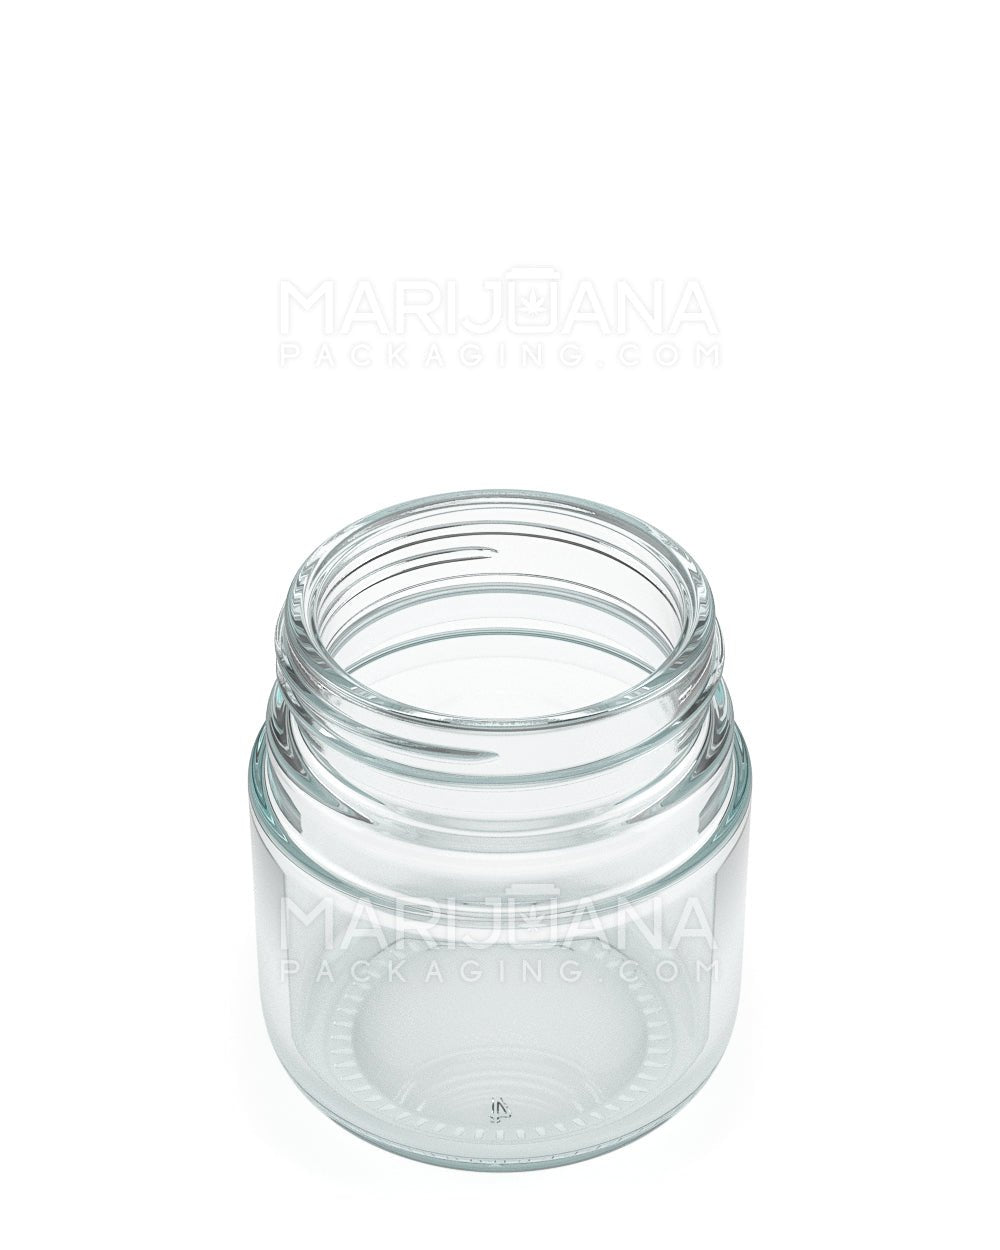 Child Resistant | Rounded Base Clear Glass Jars w/ Smooth Black Dome Cap | 55mm - 2oz - 200 Count - 3